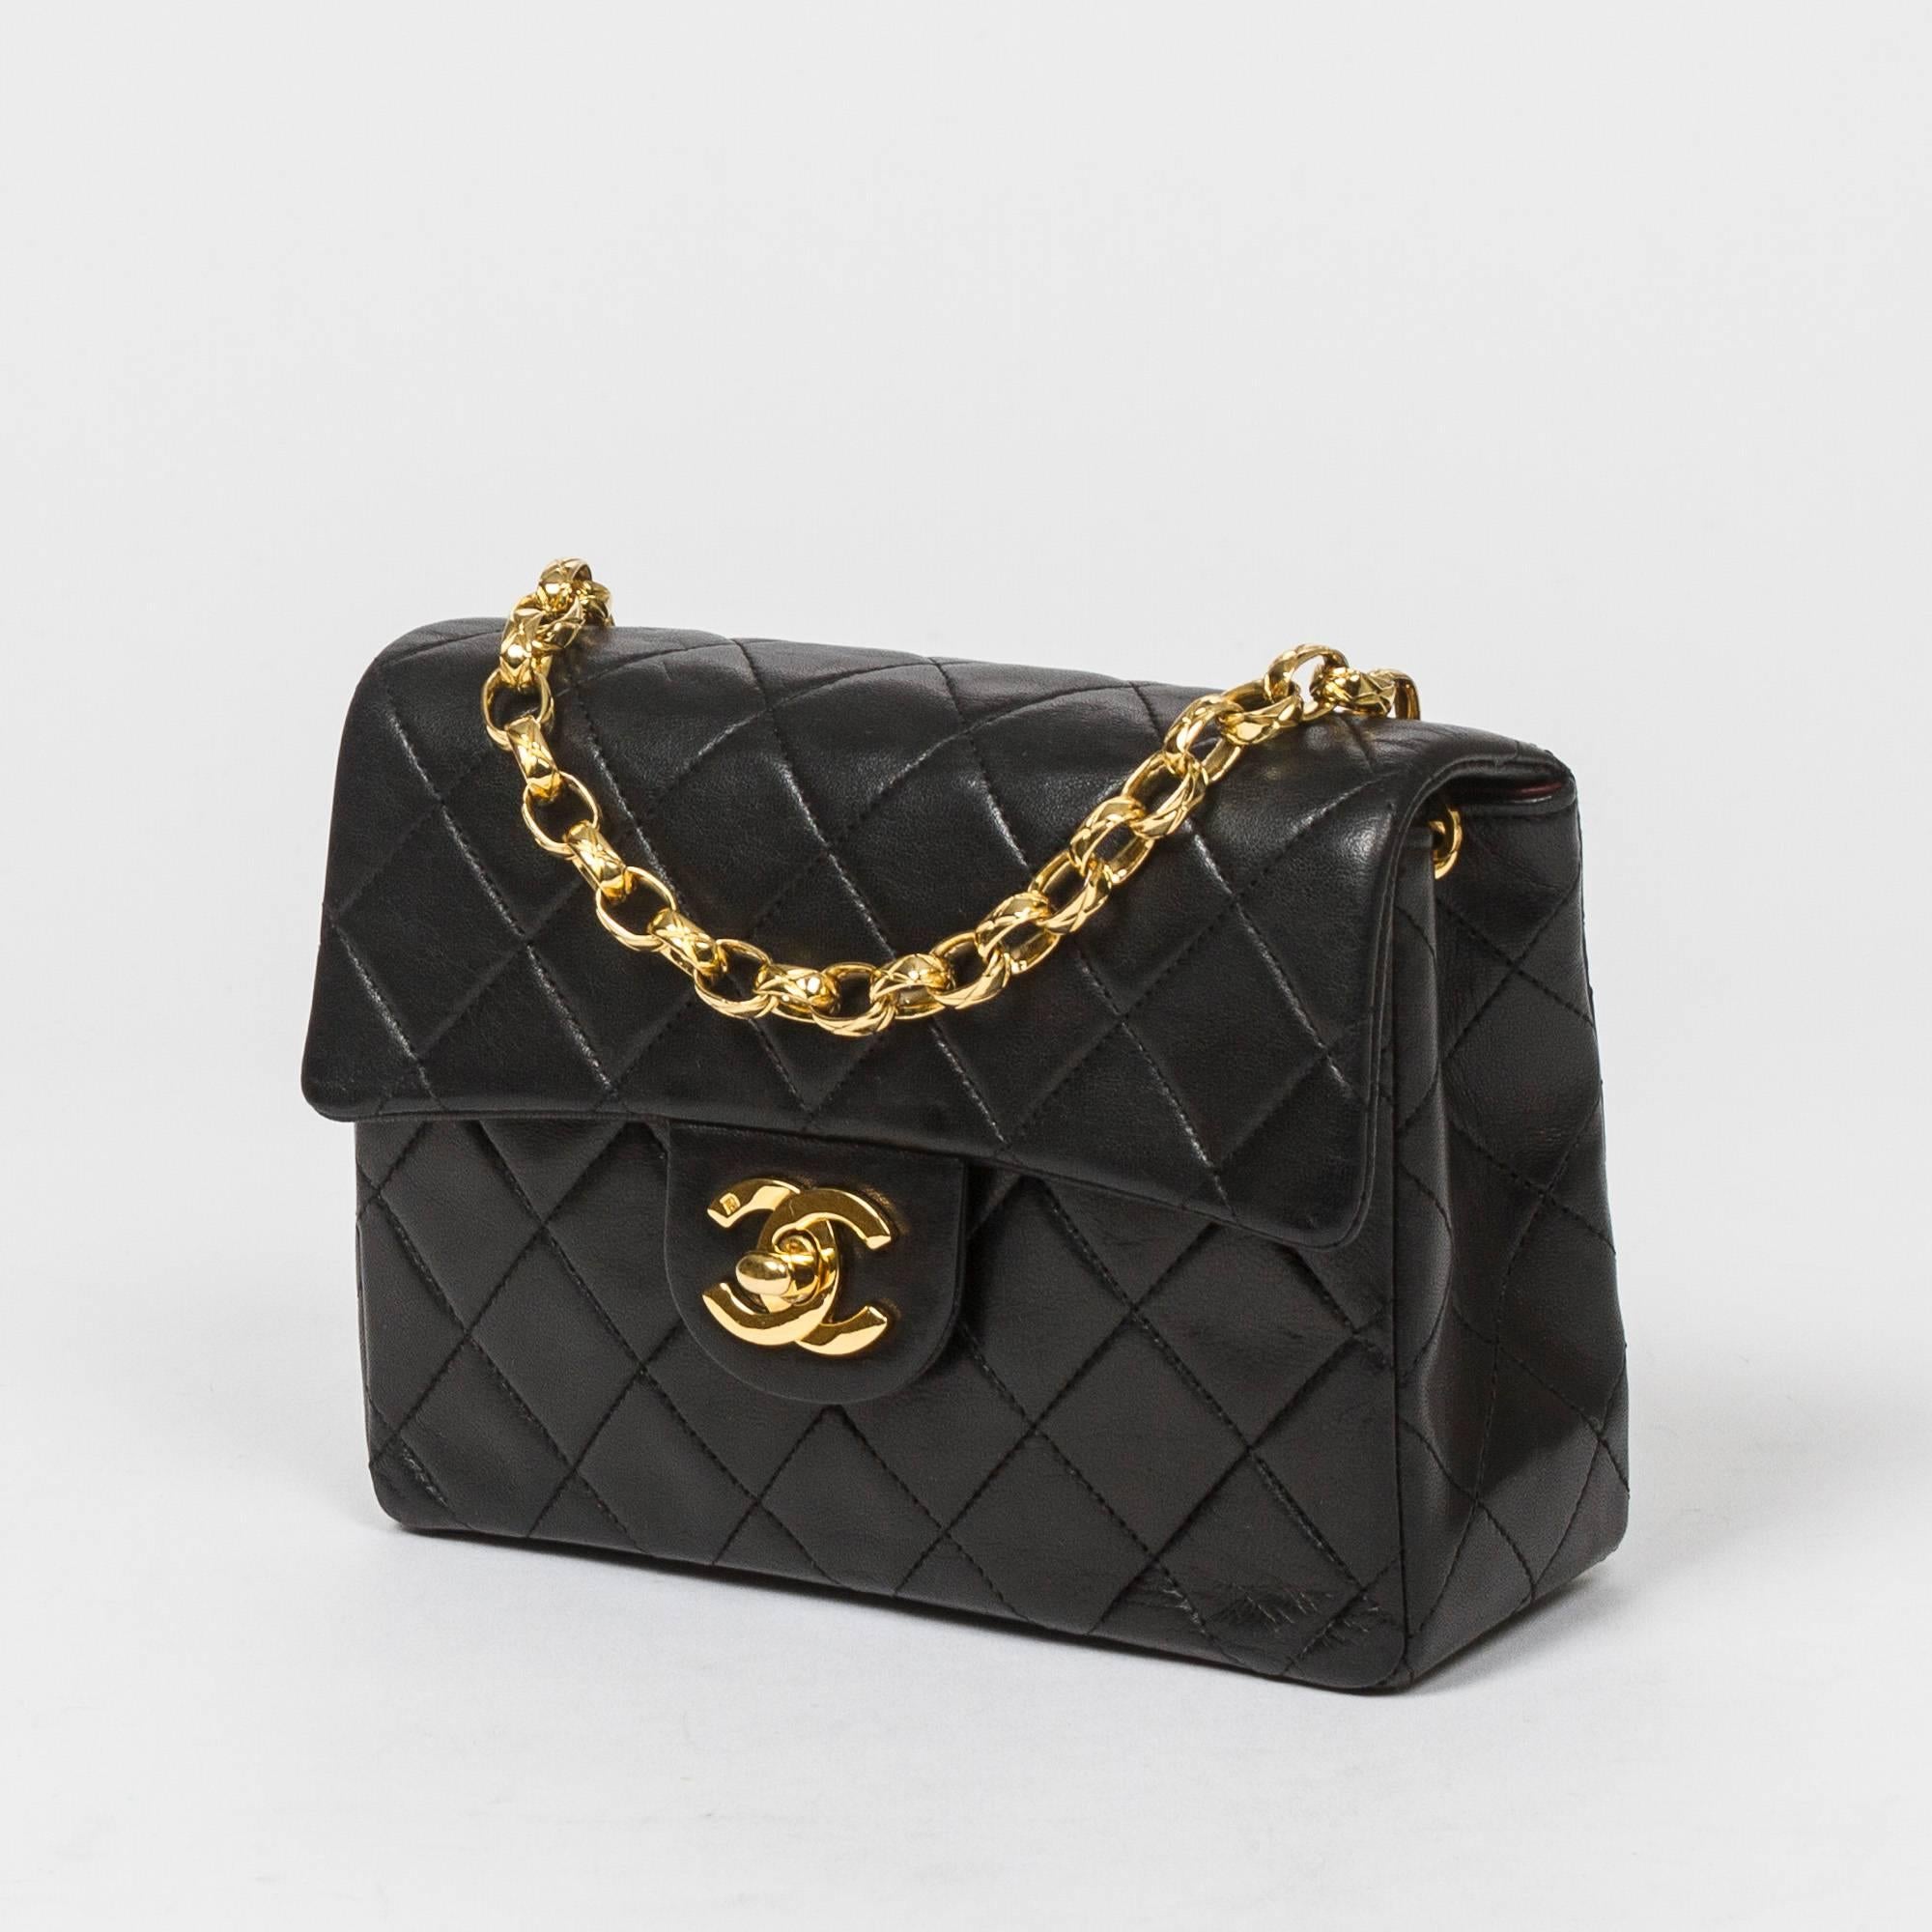 Classic Mini Flap 17cm in black quilted lambskin with thick link chain strap, gold tone CC turnlock. Back slip pocket. Burgundy leather lined interior with one slip and one zip pocket. Gold tone 